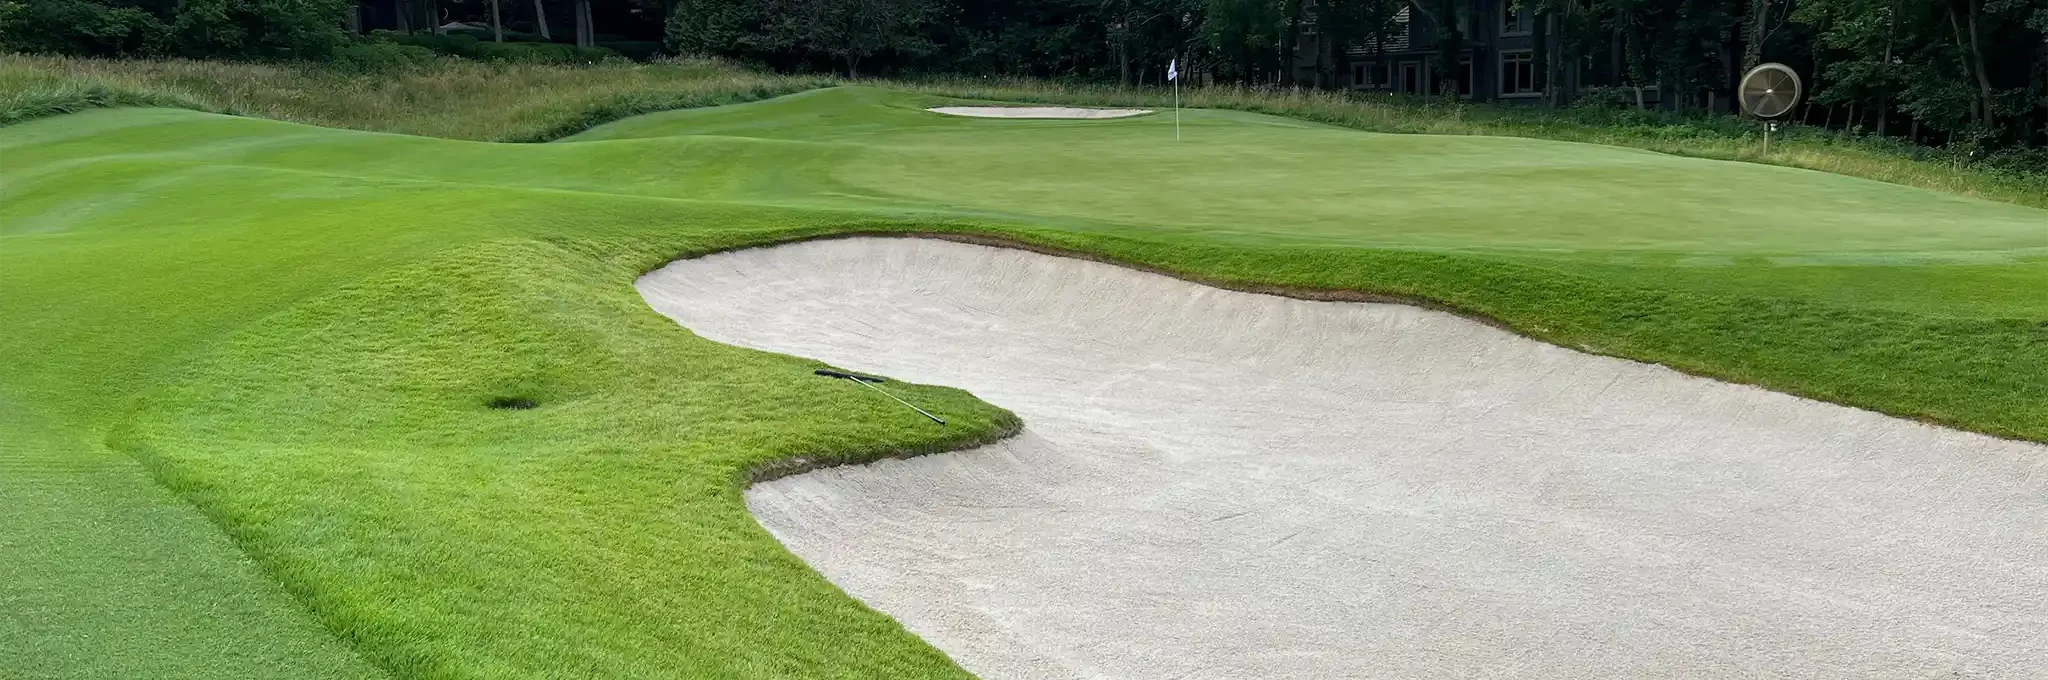 Premier play sand in use inside a golf course bunker.